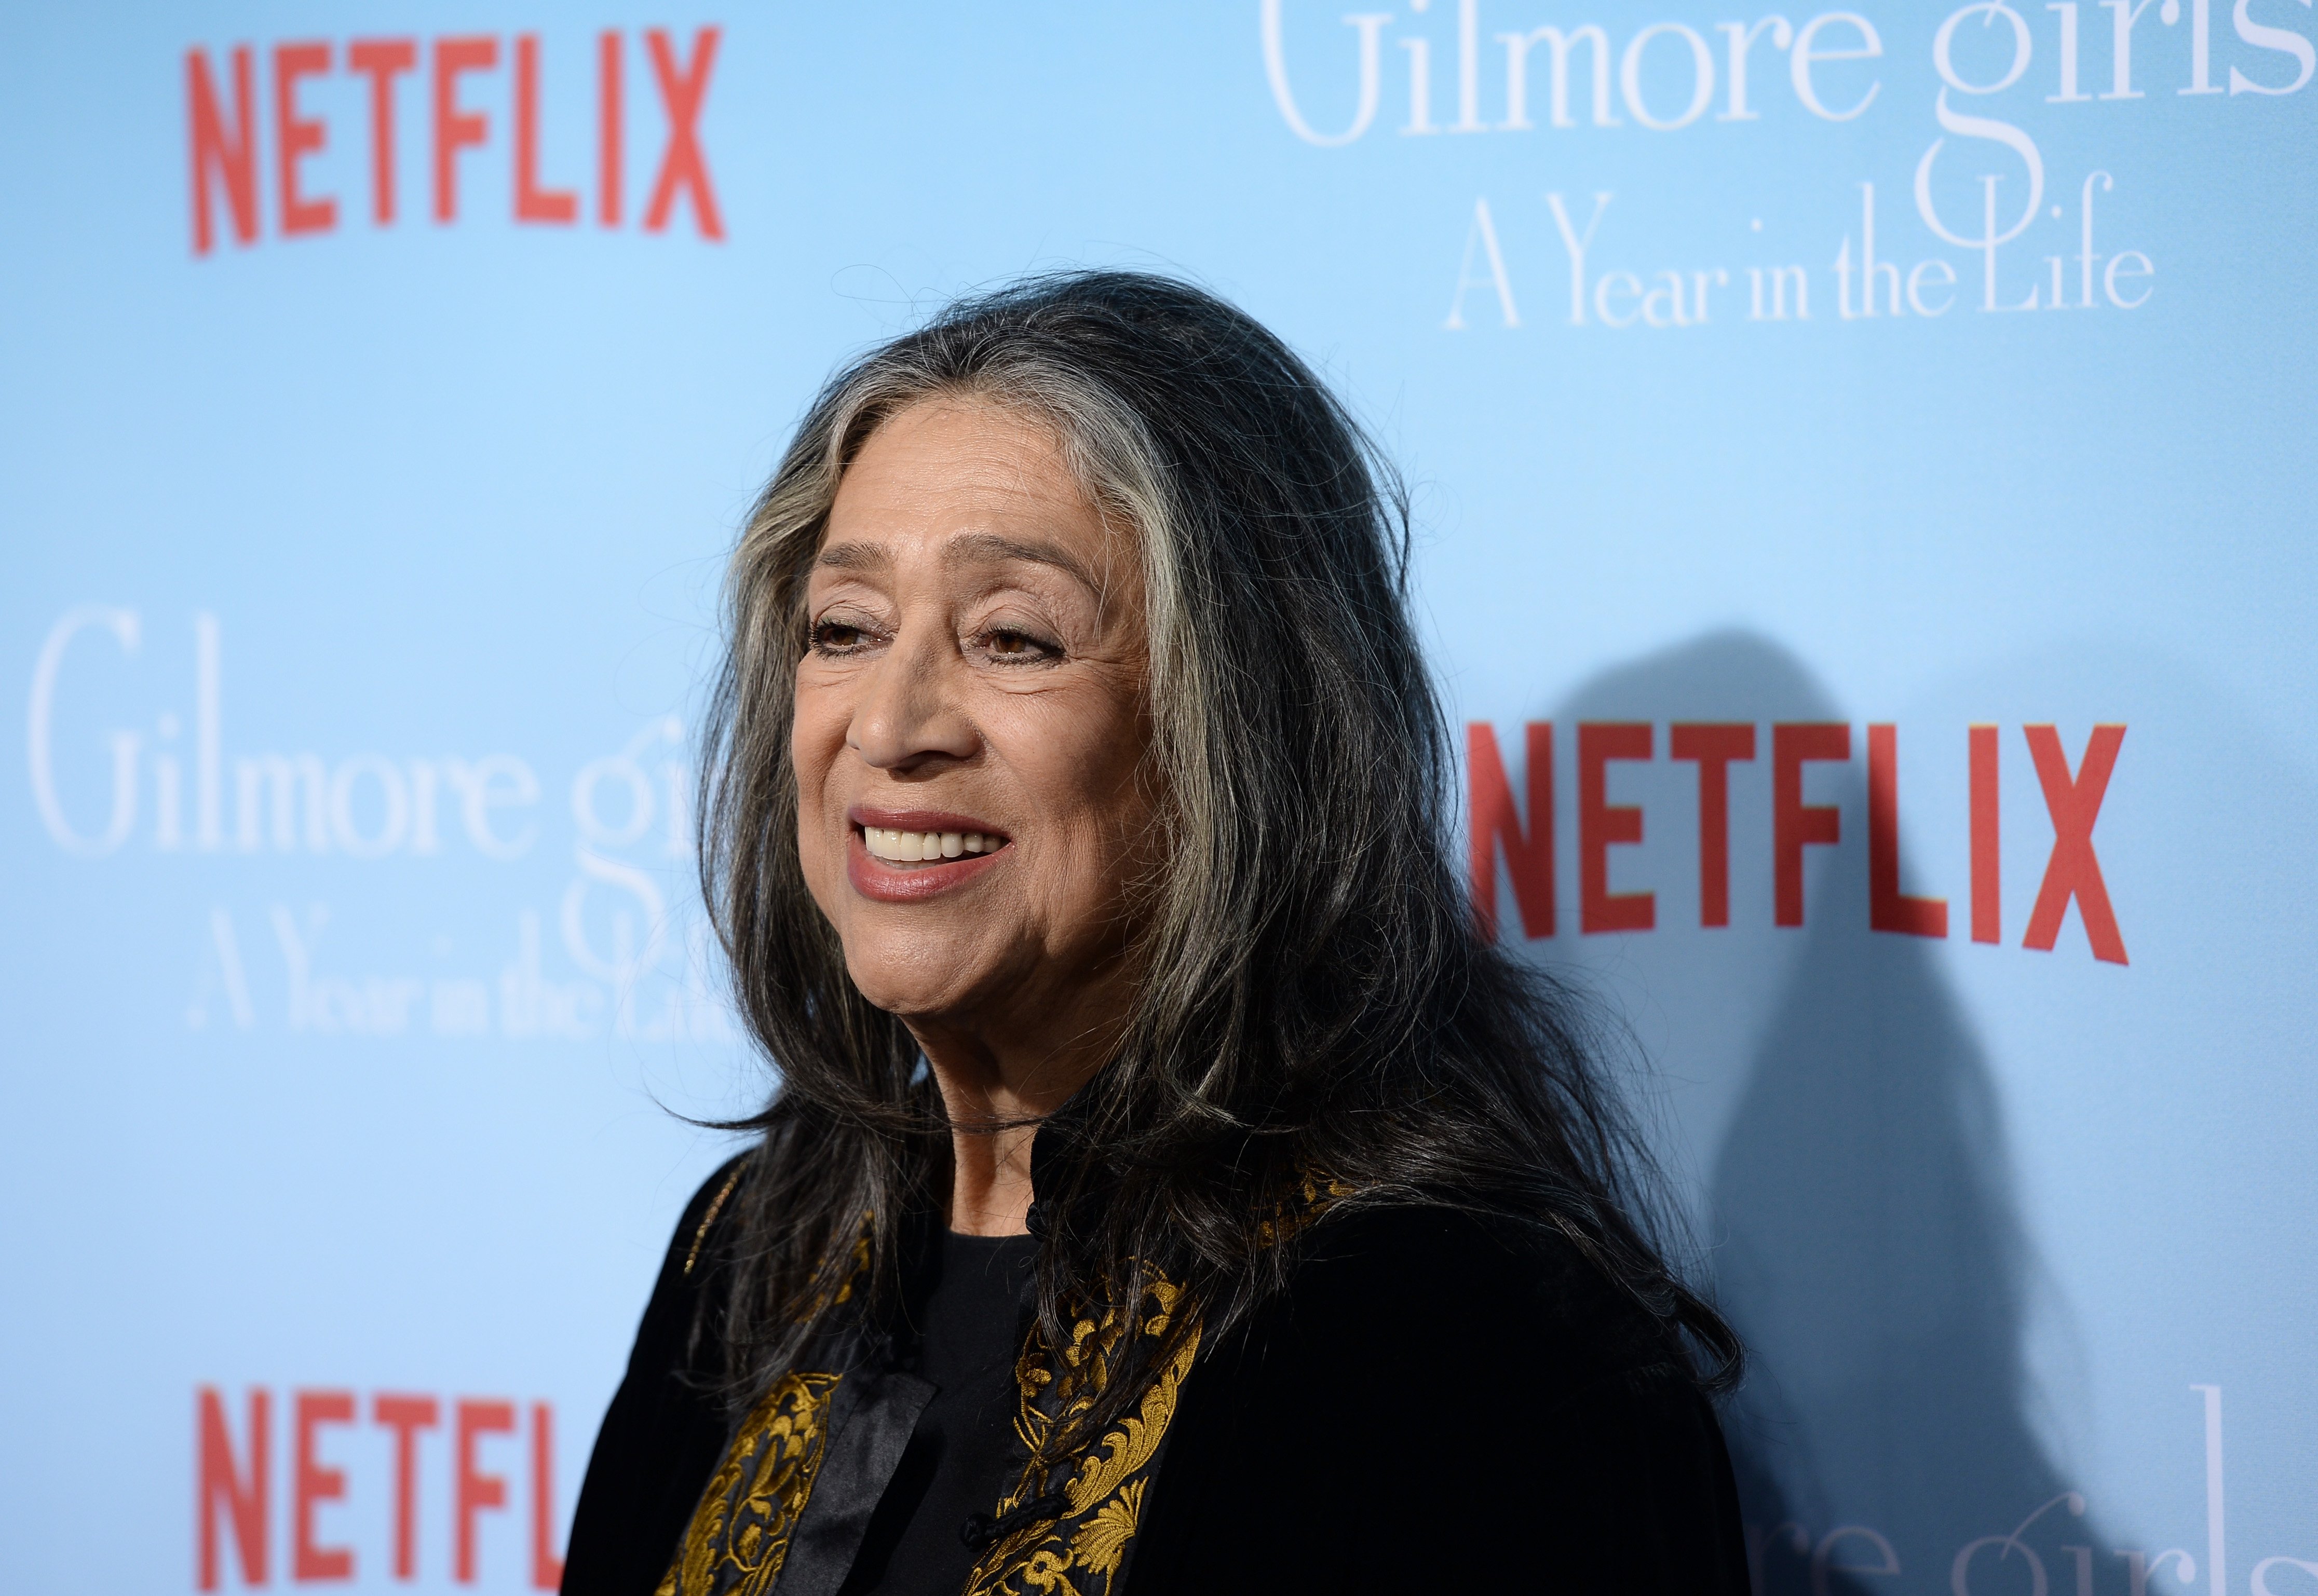 Liz Torres arrives at the premiere of Netflix's "Gilmore Girls: A Year In The Life" at the Regency Bruin Theatre on November 18, 2016